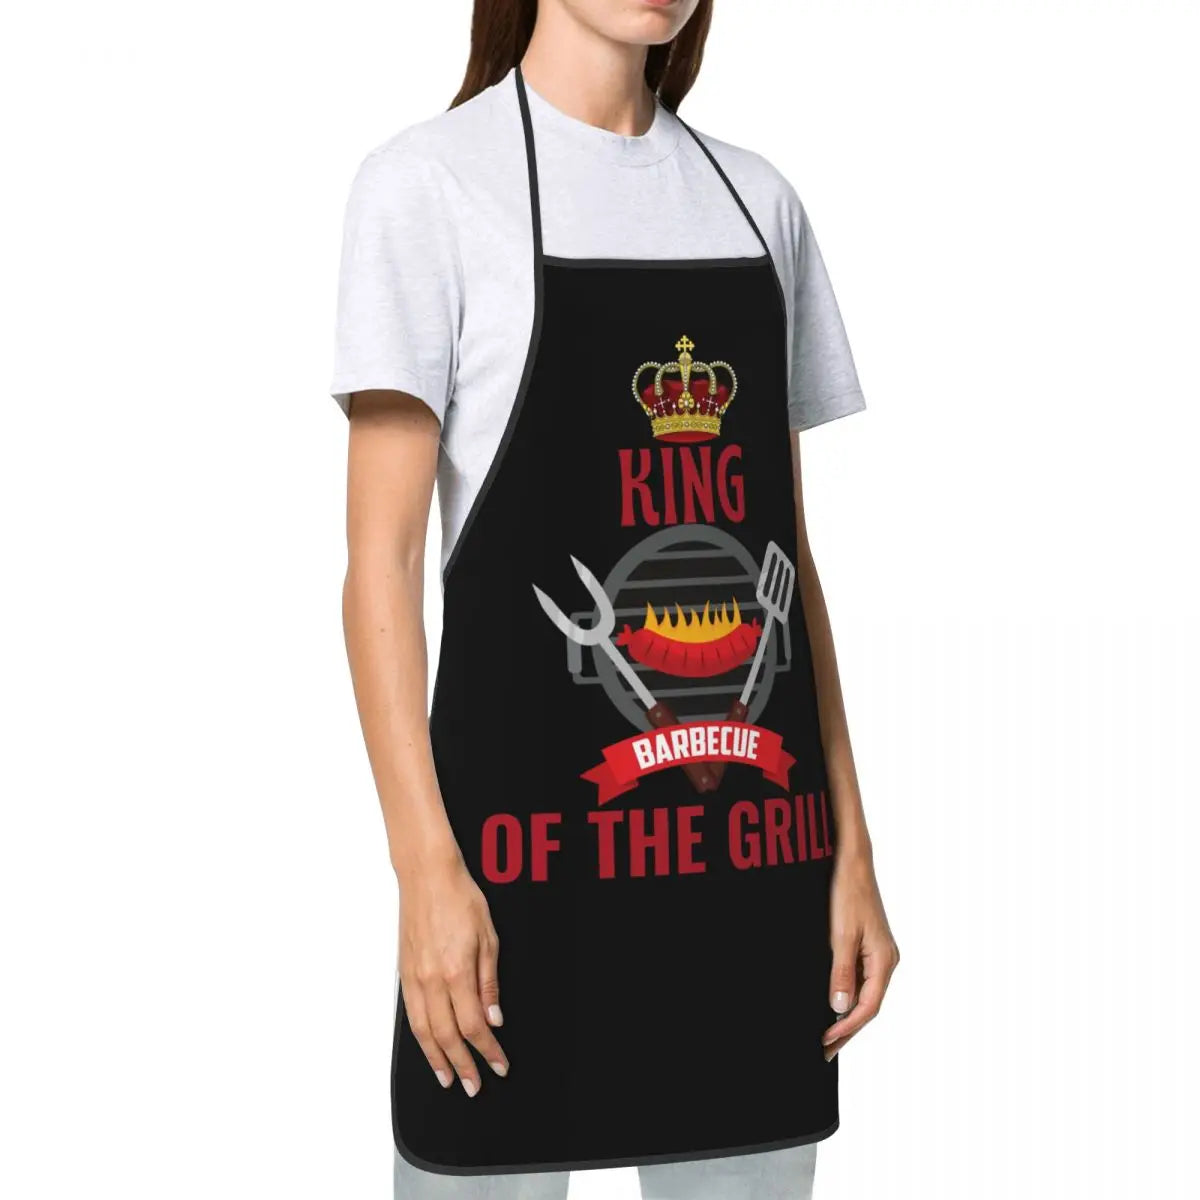 BBQ Master King Of The Grill Bib Apron Women Men Unisex Kitchen Chef Barbecue Lover Tablier Cuisine for Cooking Baking Gardening - Roy Entreprise